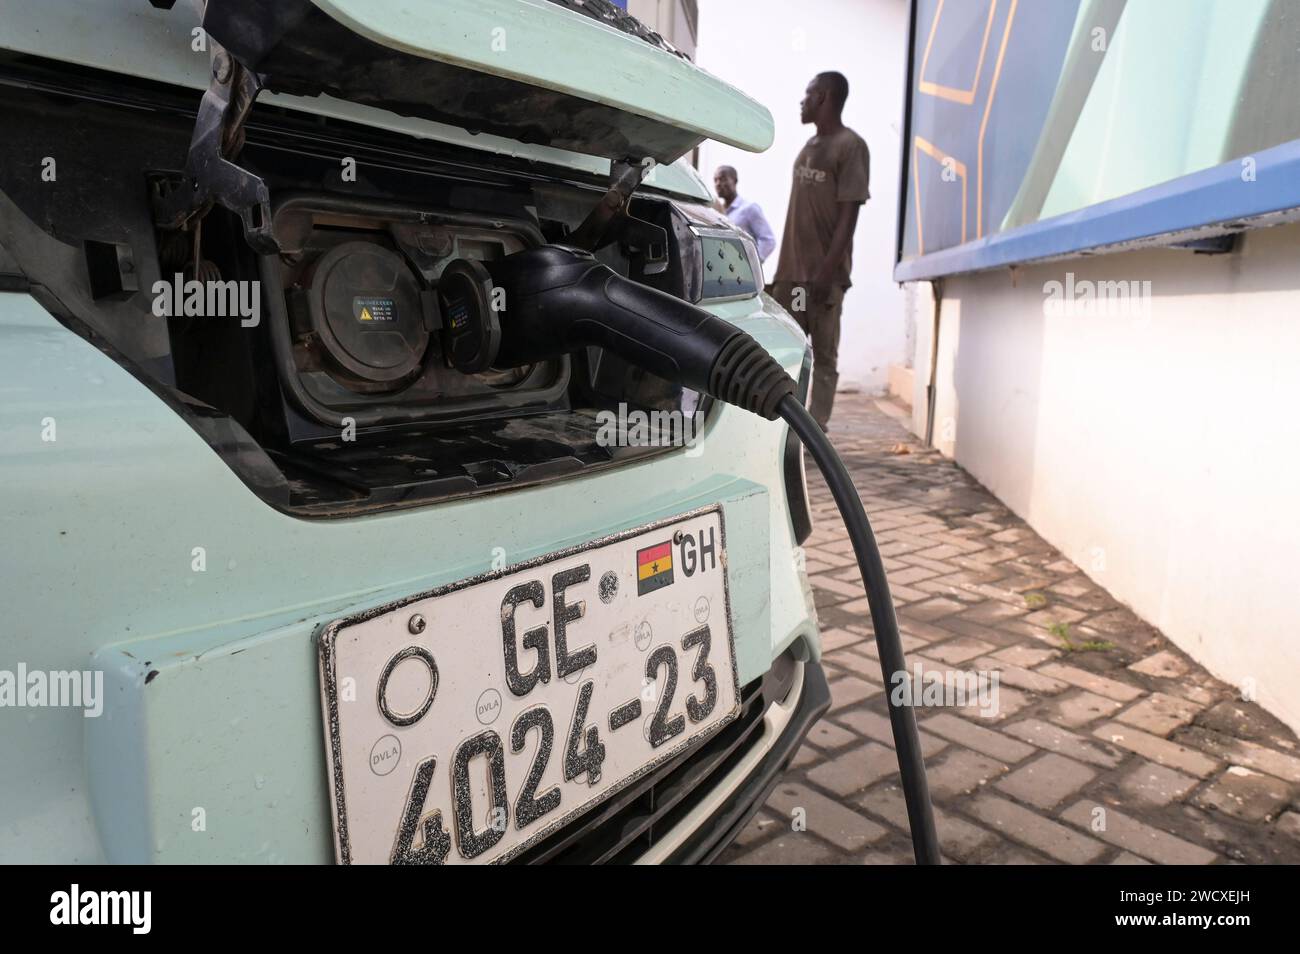 GHANA, Accra, electric mobility, IJANU service and quick charging station for electric cars, chinese Dongfeng EX1 electric car / GHANA, Accra, E-Mobilität, IJANU Service und Ladestation für E-Autos, chinesisches Dongfeng EX1 E-Auto Stock Photo